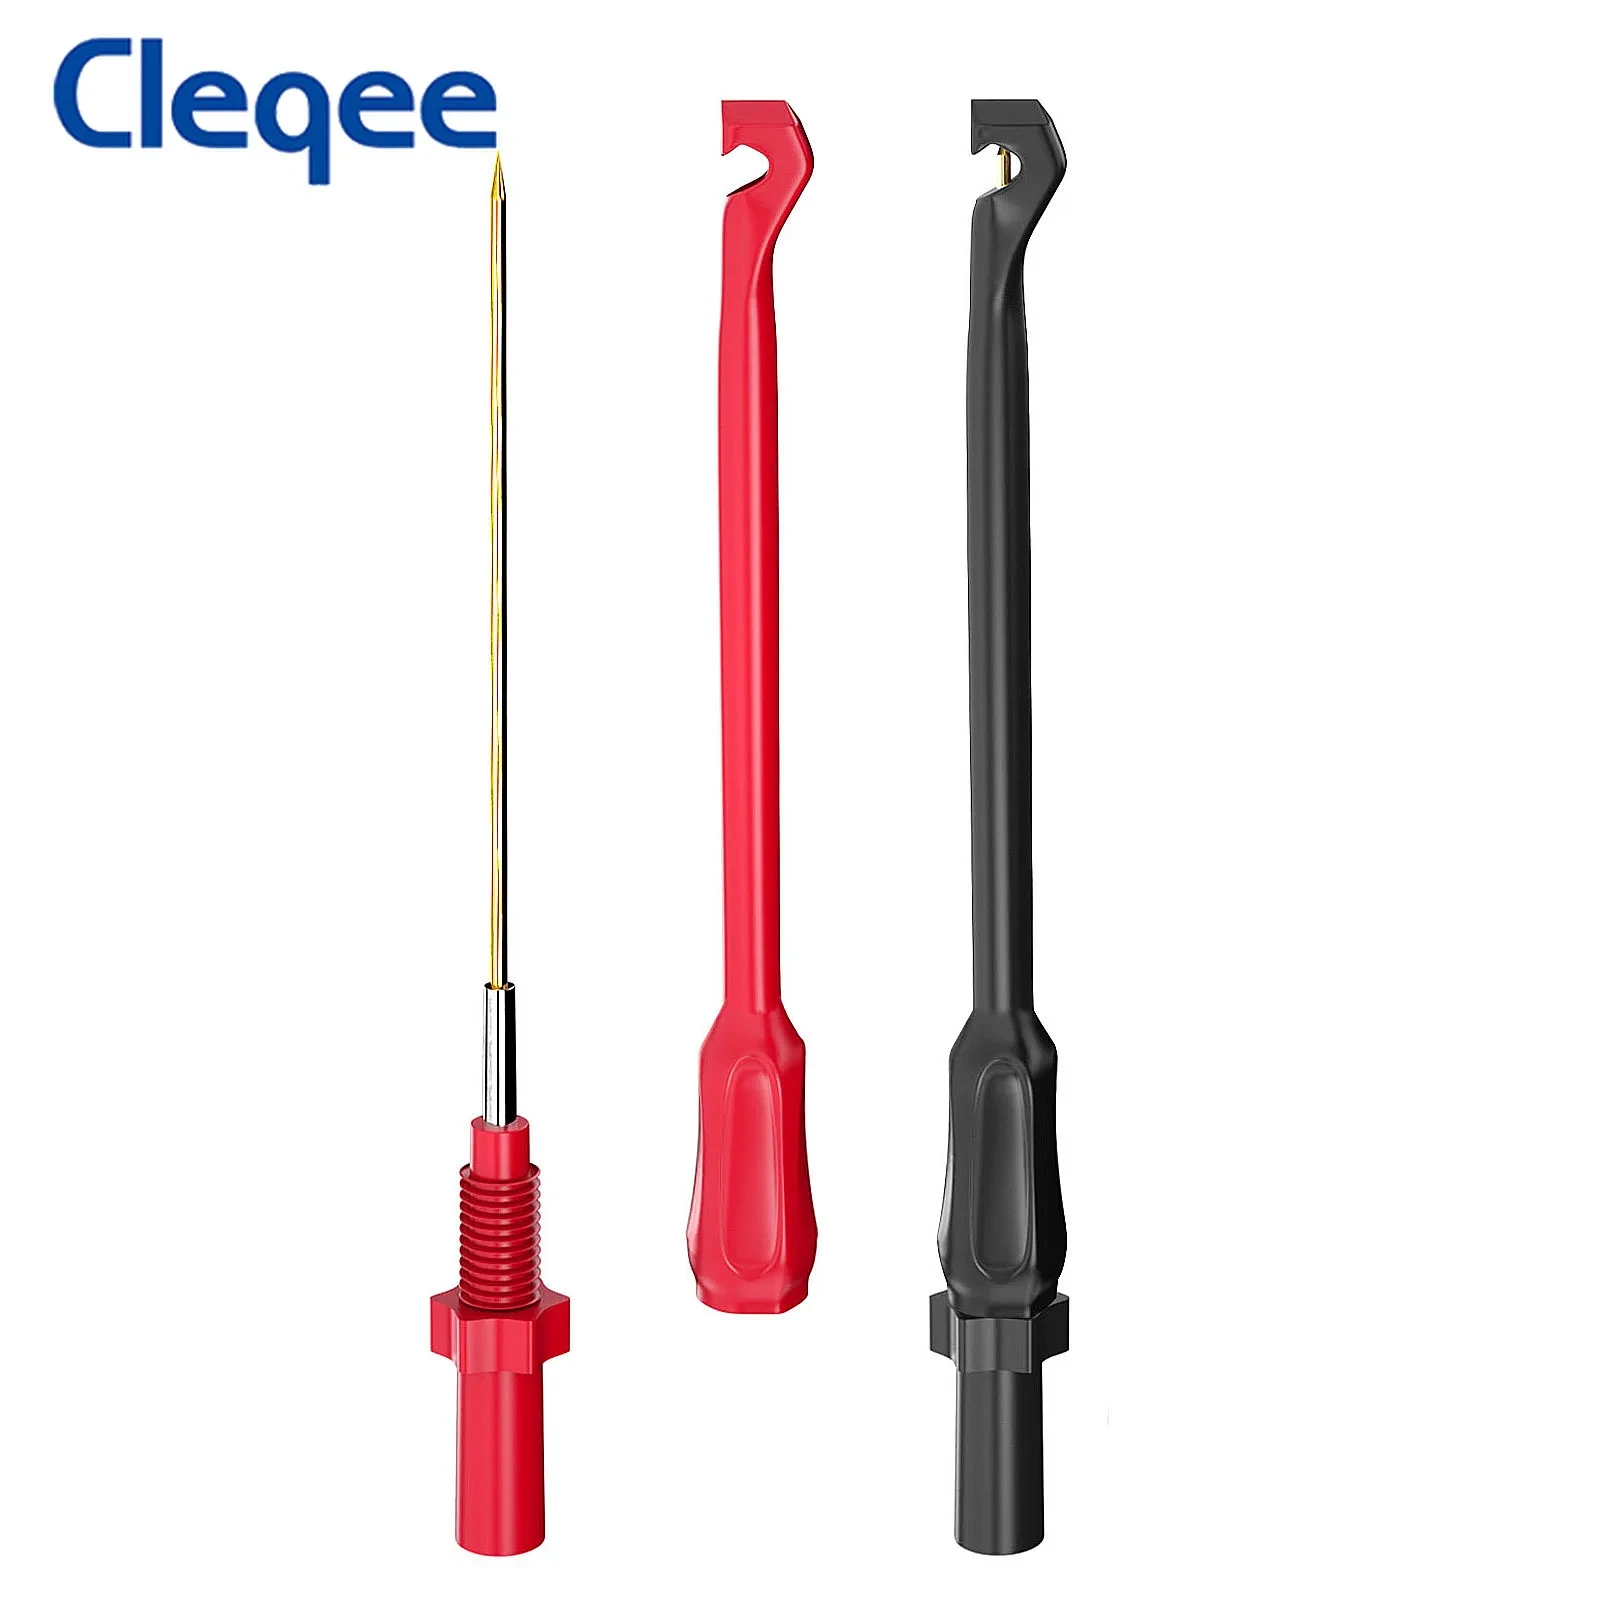 Cleqee P30036 Safety Non-Destructive Wire-Piercing Probes With 4mm Jack Puncture Probe Multimeter Automotive Test Hook Tool